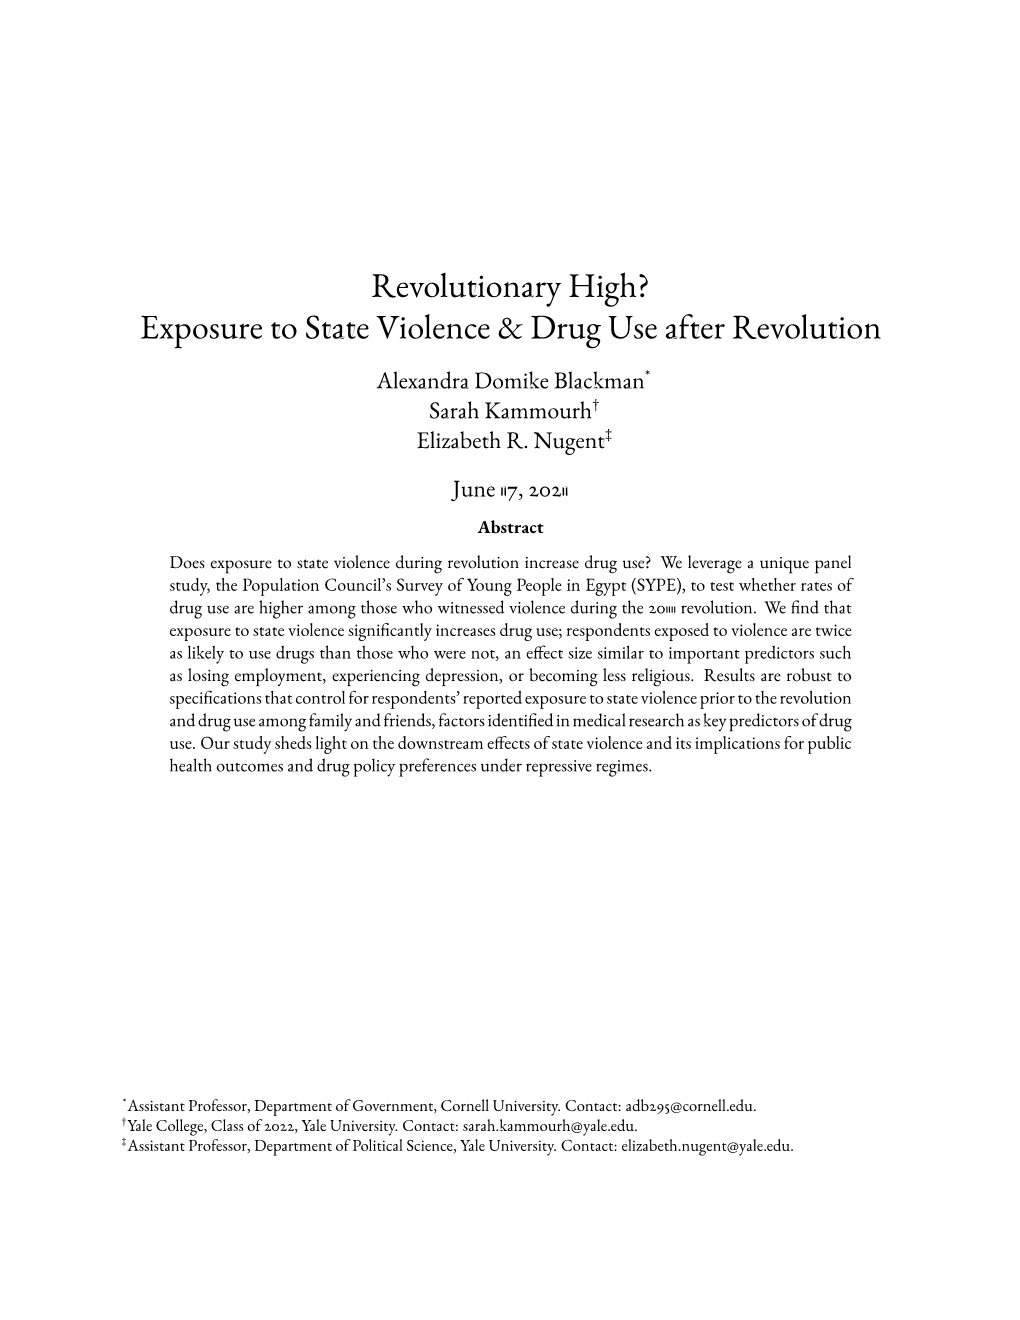 Revolutionary High? Exposure to State Violence & Drug Use After